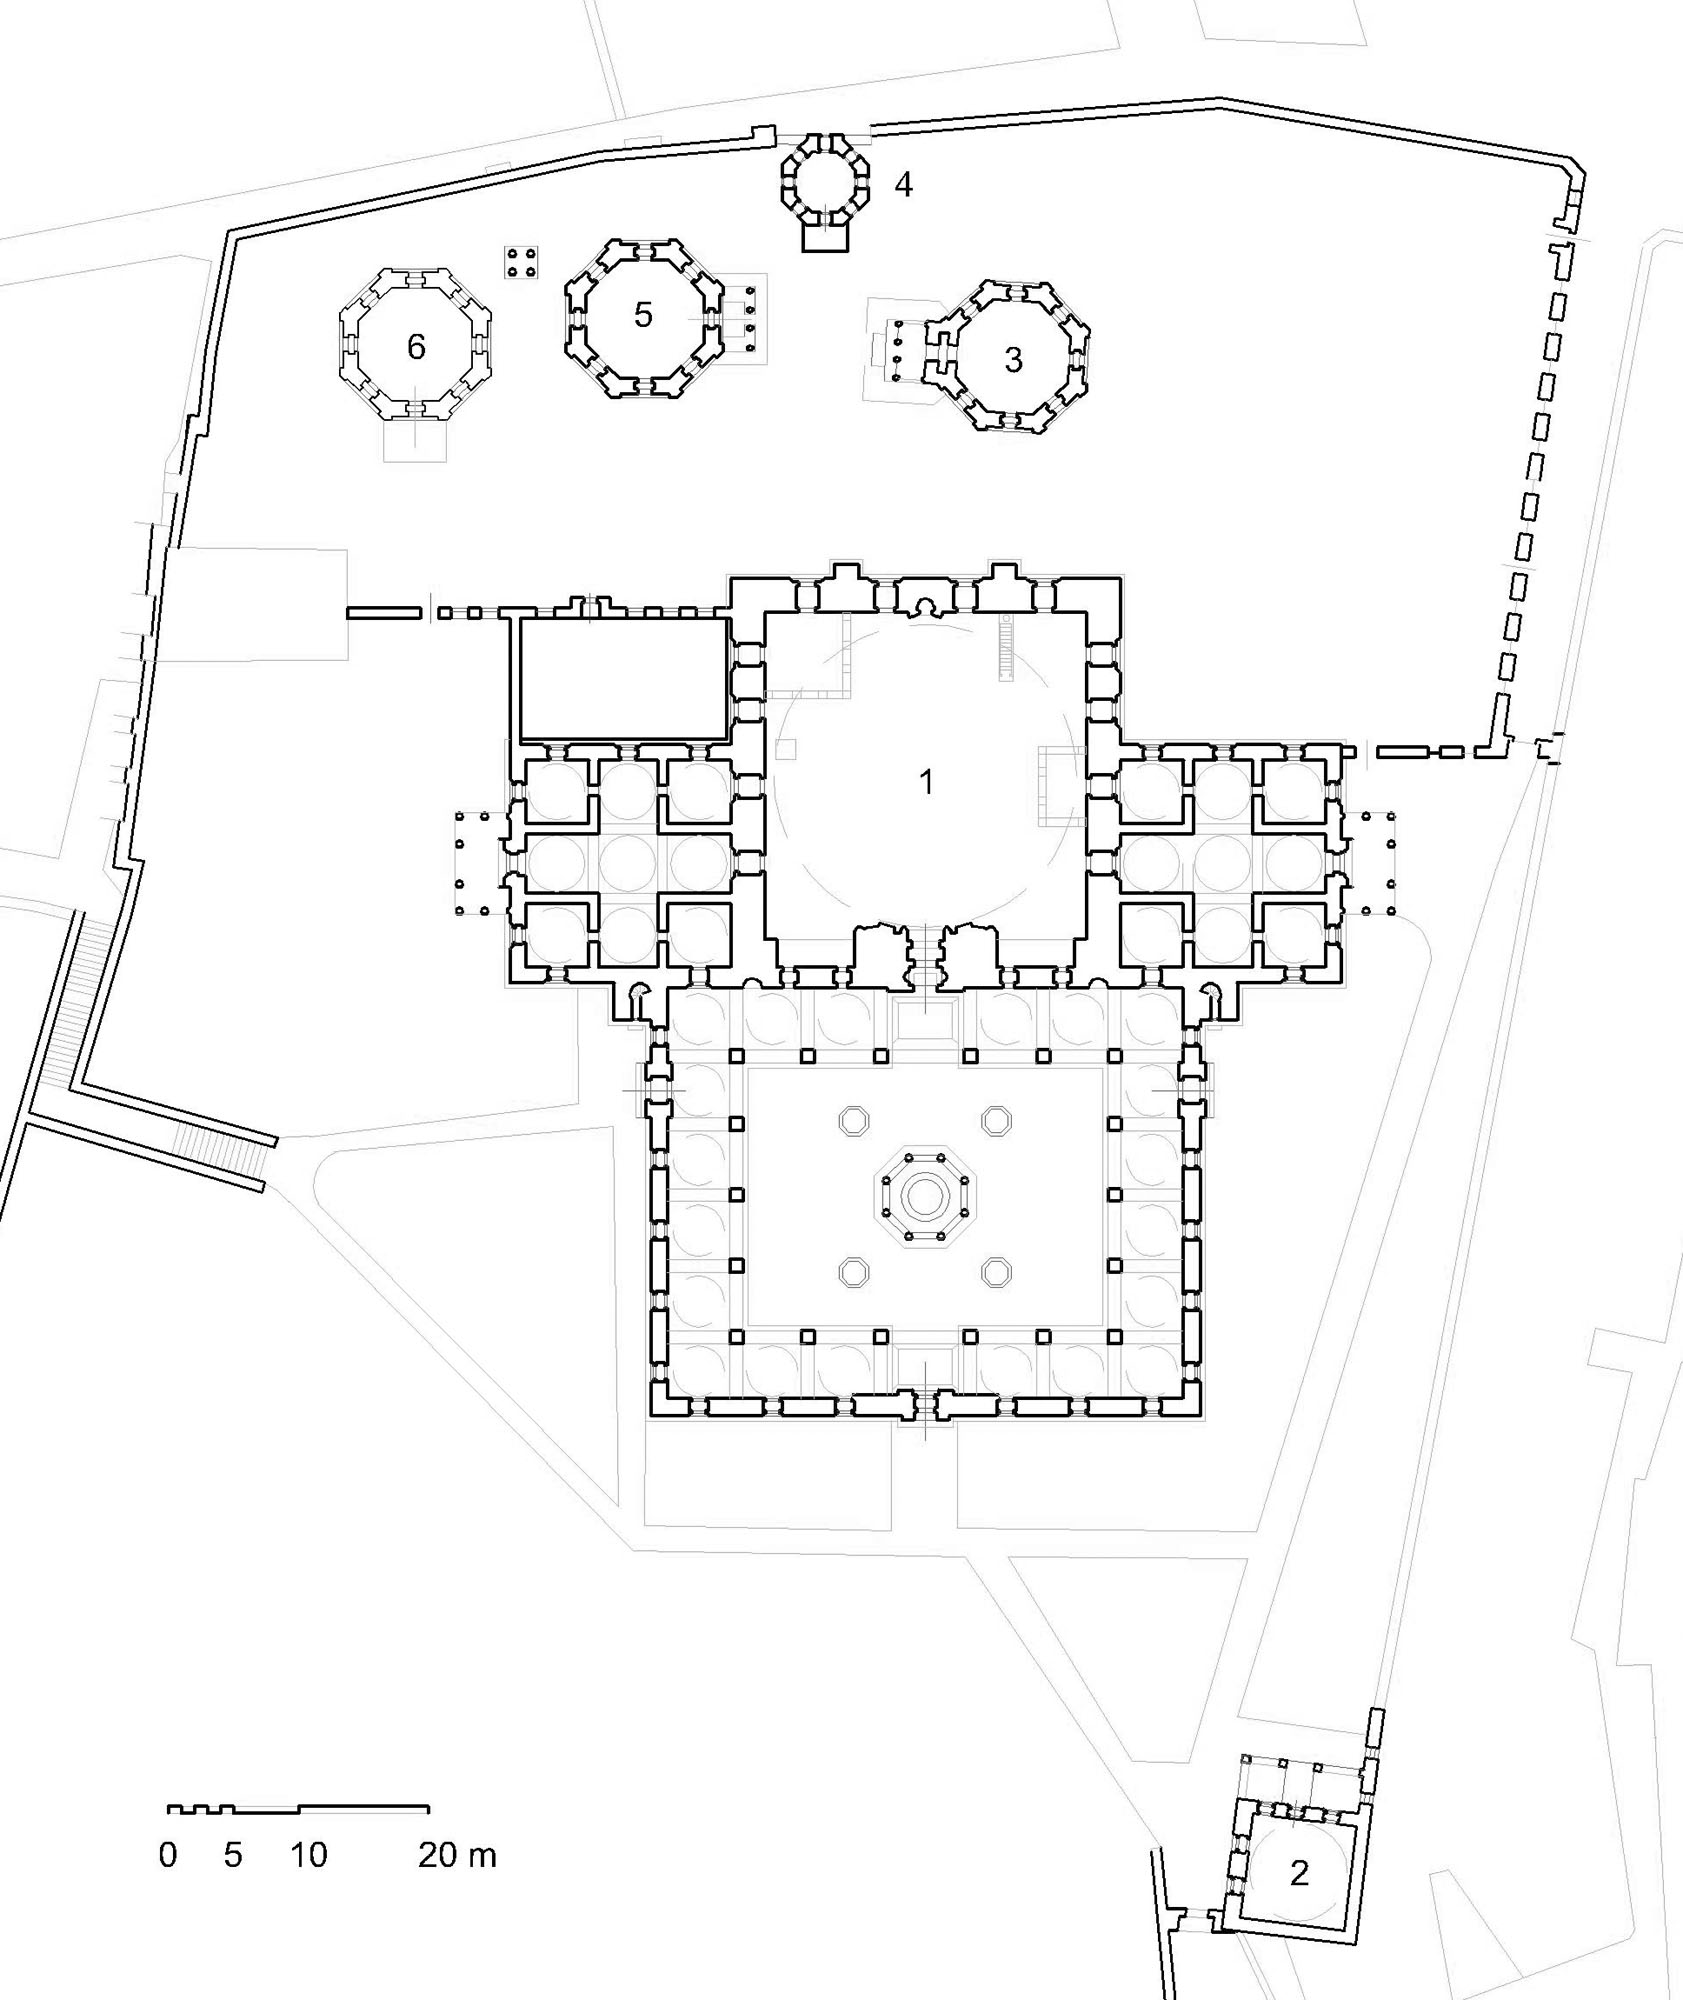 Sultan Selim Külliyesi - Floor plan of complex showing (1) mosque, (2) elementary school, (3) mausoleum of Selim I, (4) mausoleum of Hafsa Sultan (demolished), (5) mausoleum of Sultan Süleyman's children, (6) mausoleum of Sultan Abdülmecid (1861). DWG file in AutoCAD 2000 format. Click the download button to download a zipped file containing the .dwg file.